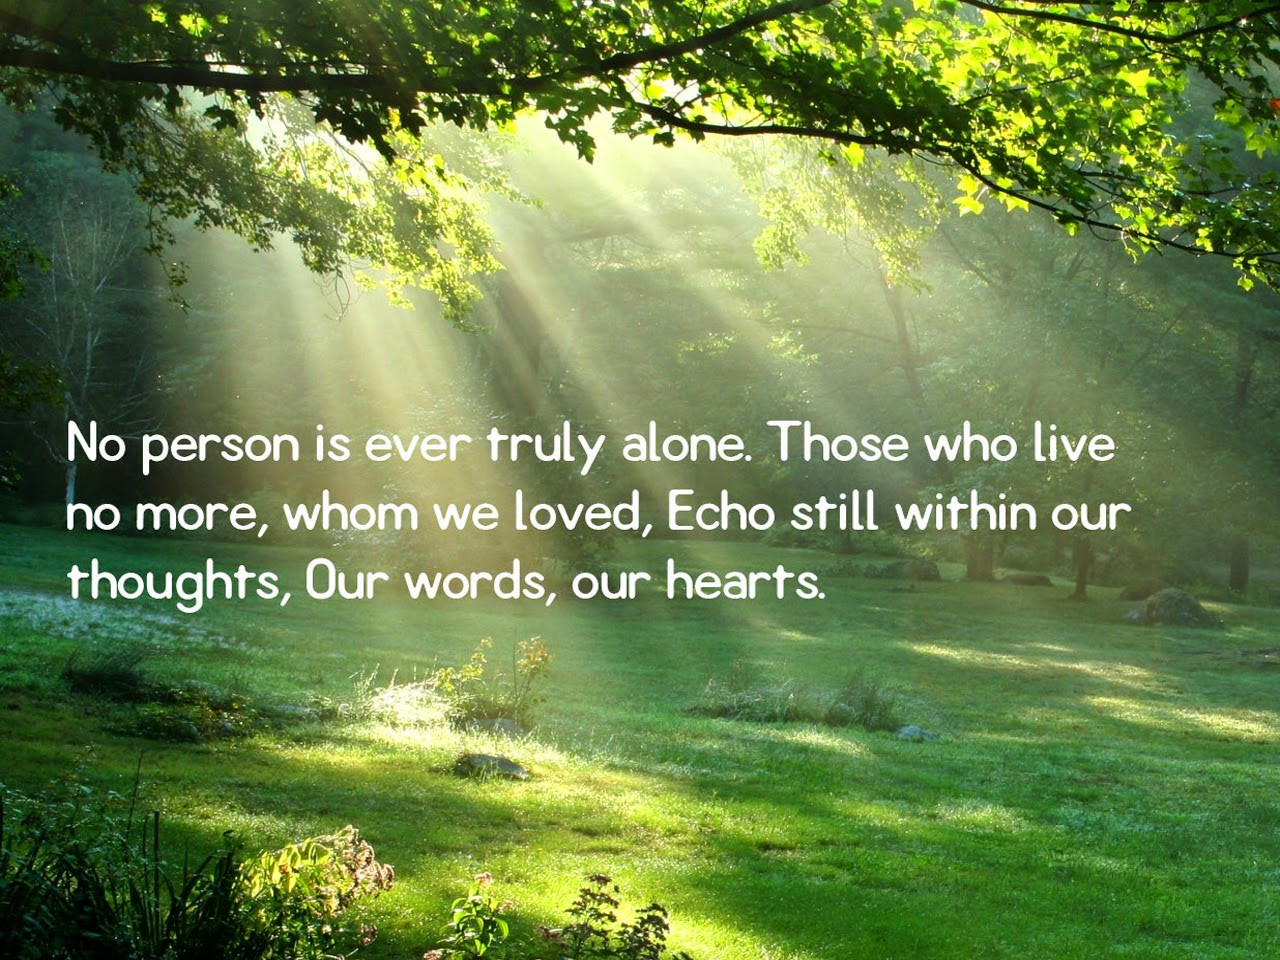 Loss Of A Loved One Quotes Inspirational
 Sympathy Quotes And Saying For Losing Someone Poetry Likers